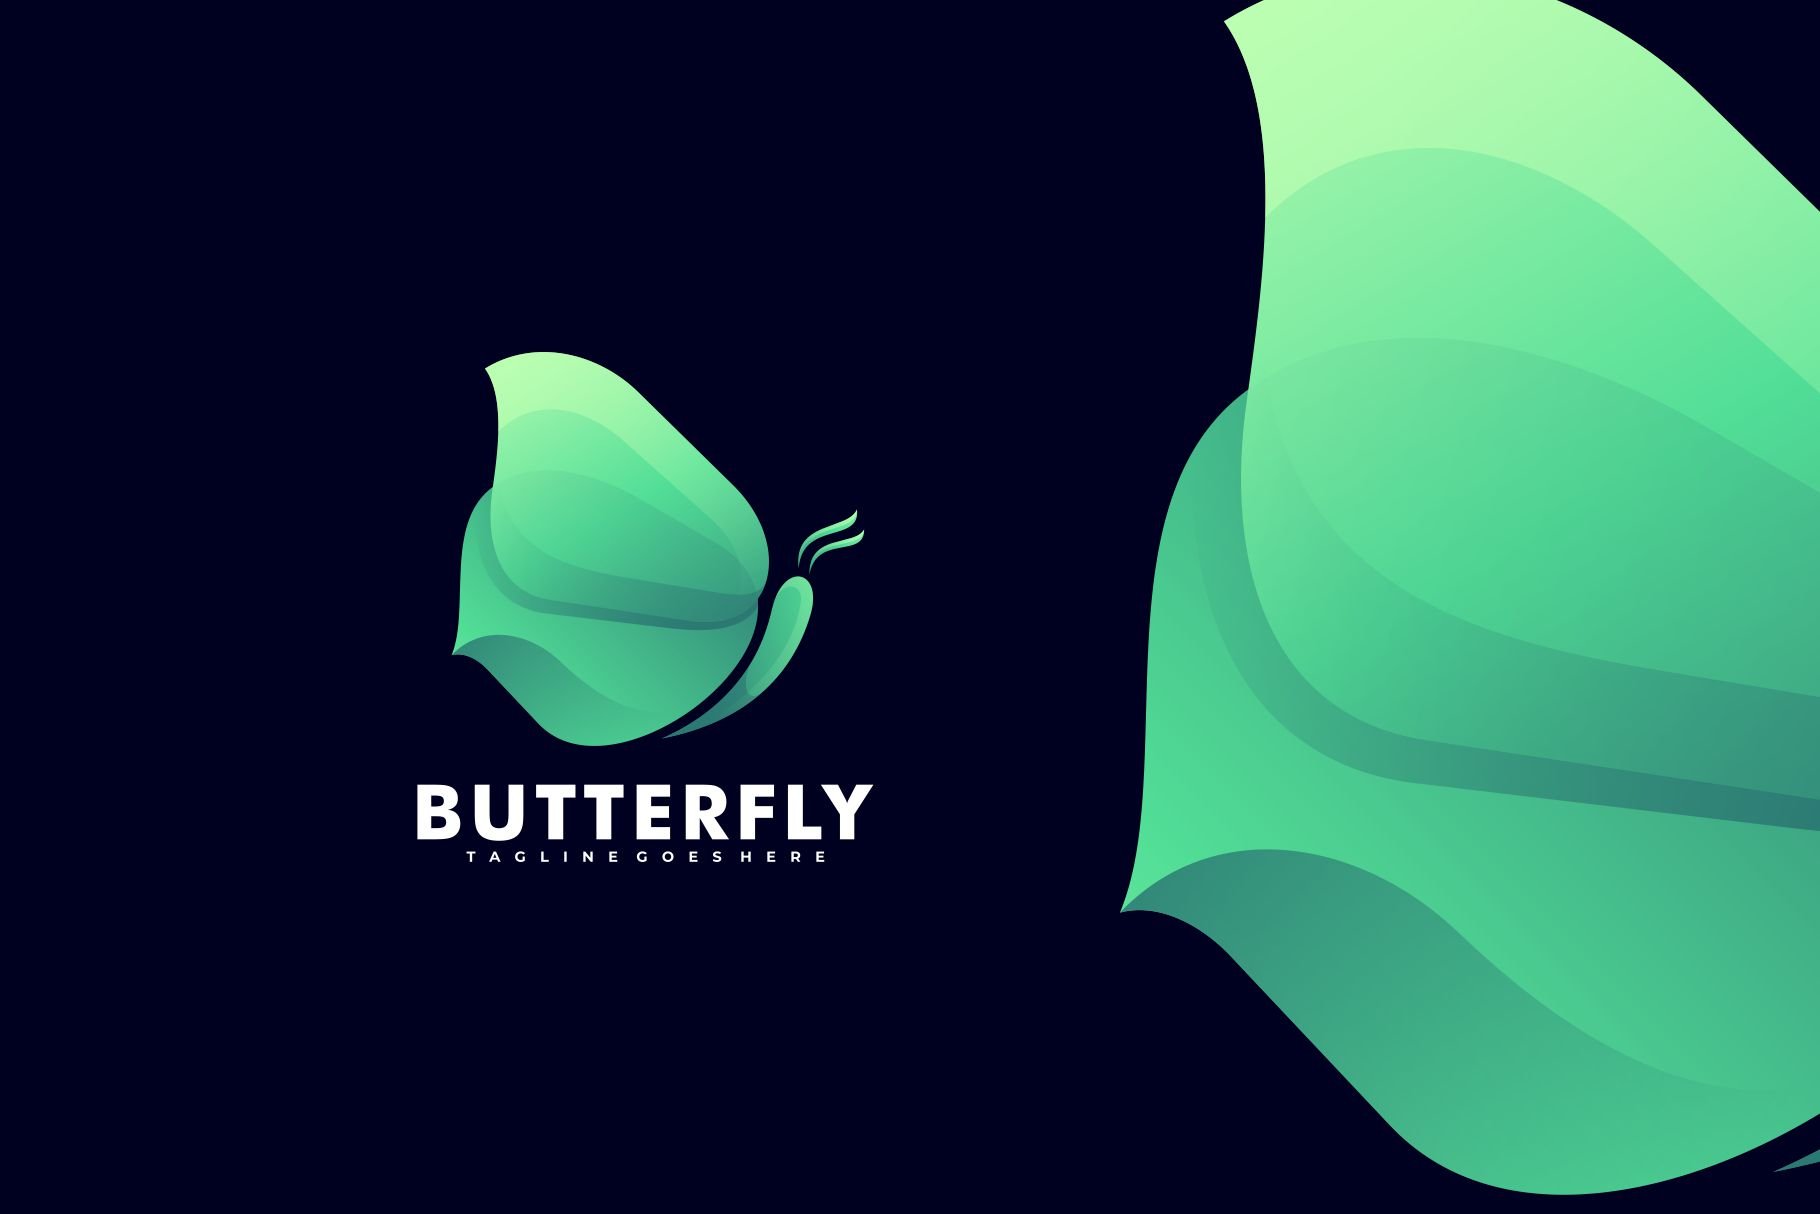 Butterfly Gradient Logo cover image.